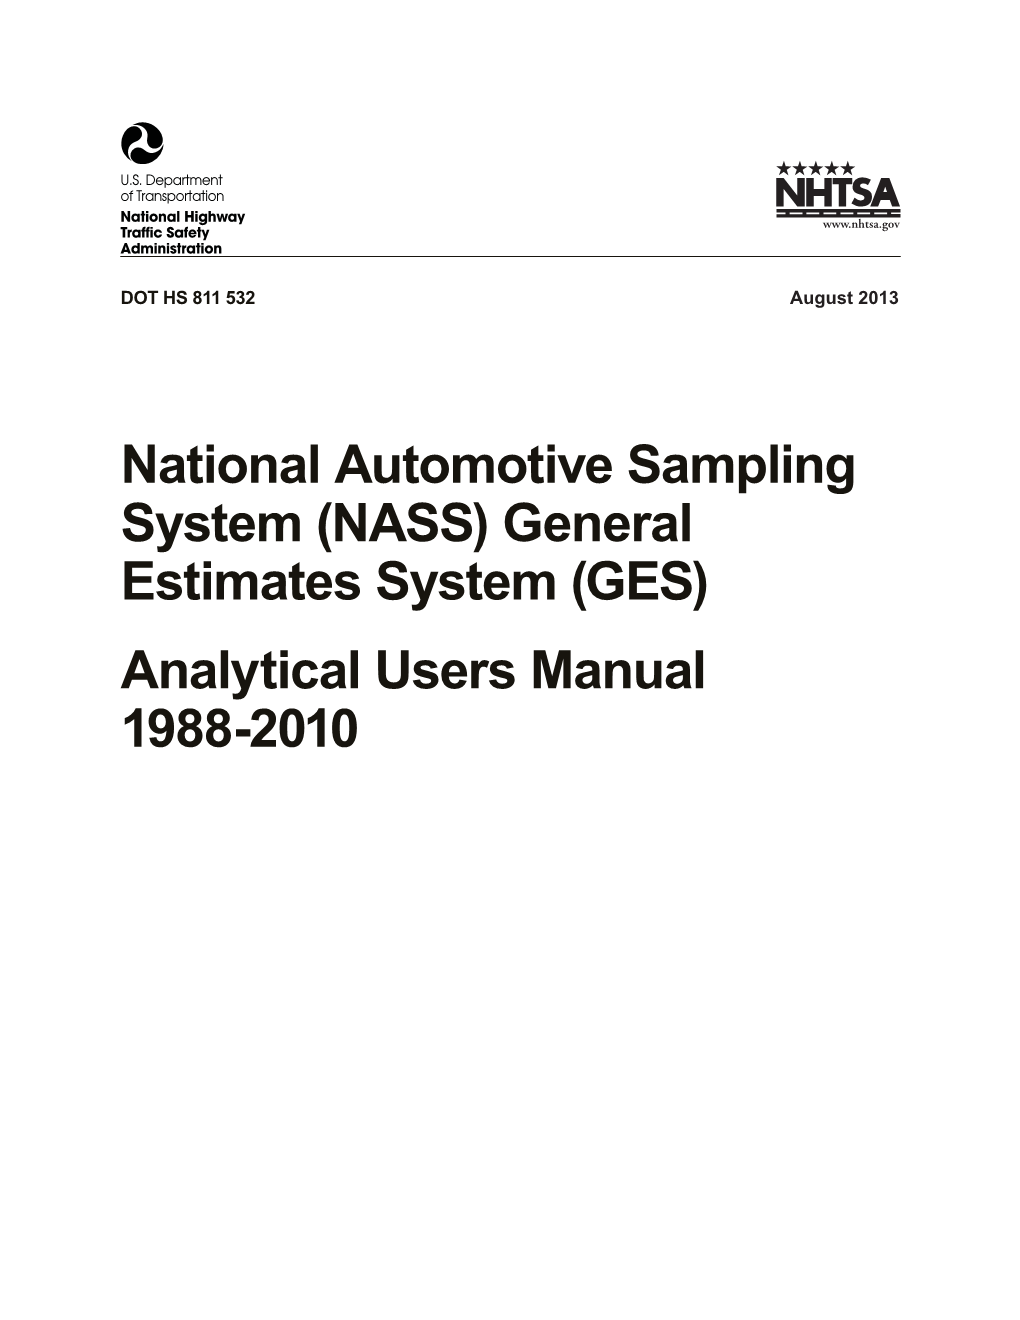 2010 NASS GES Analytical User's Manual